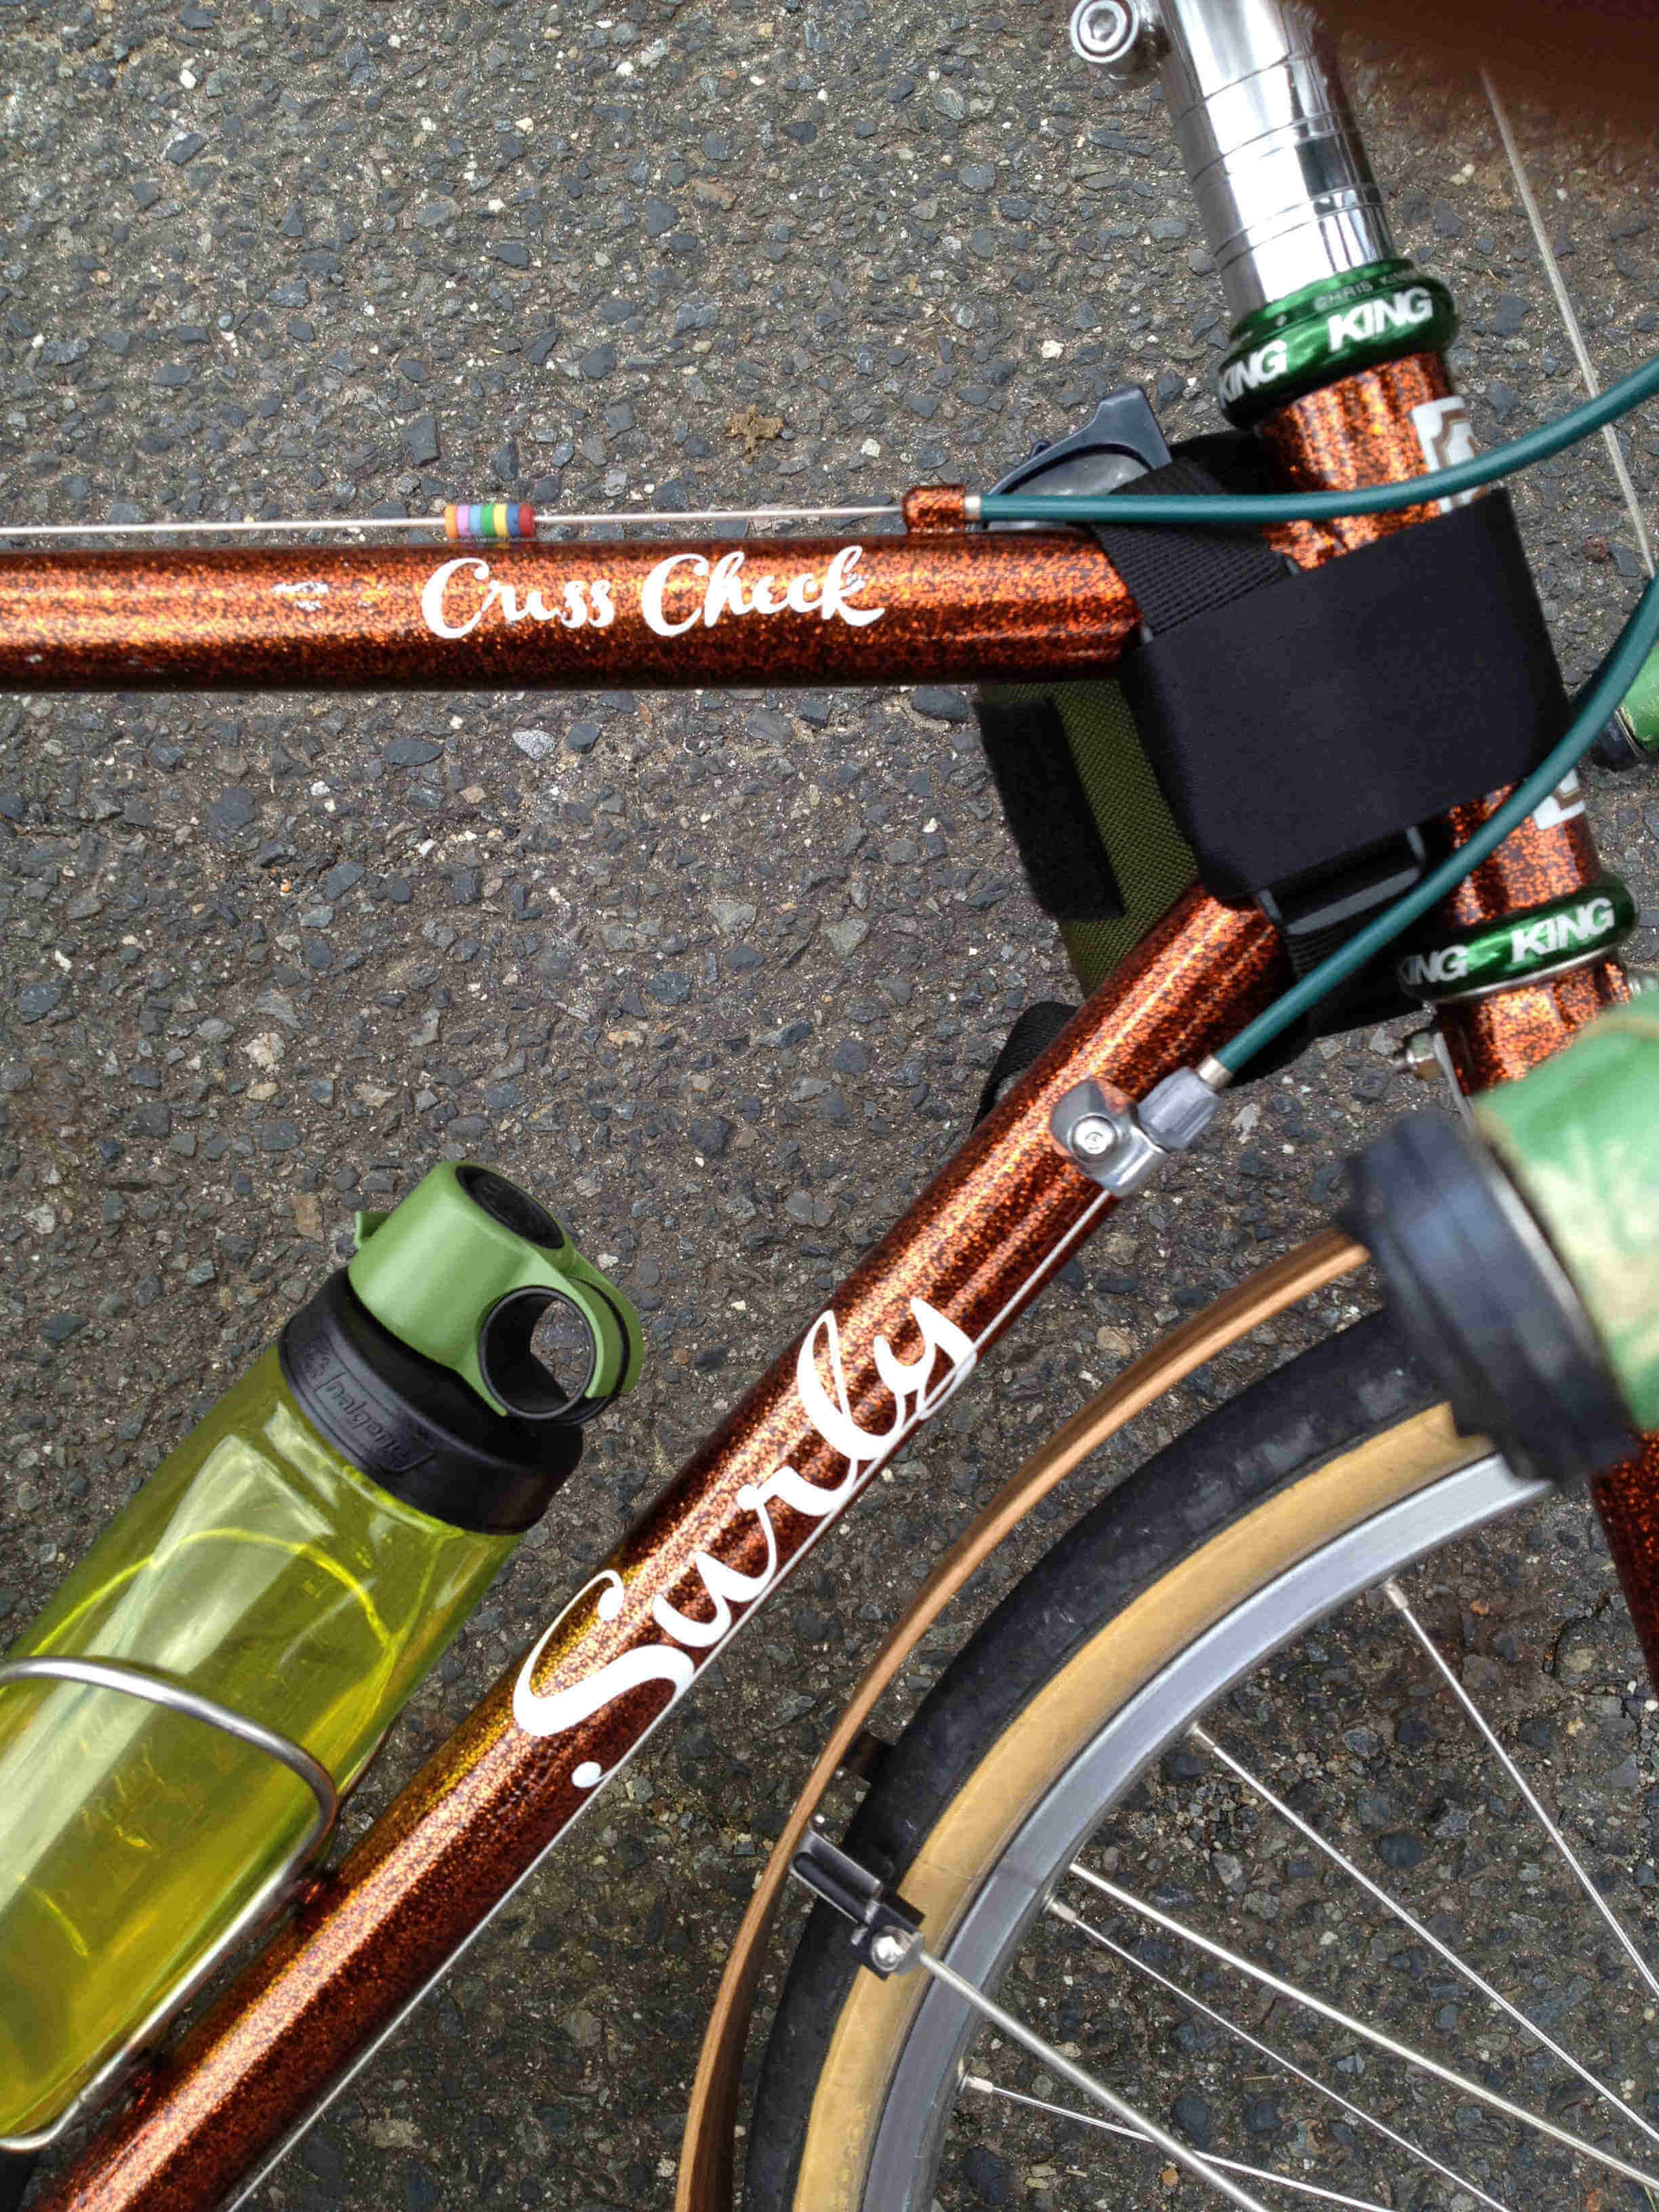 Downward, right side, front end view of a copper Surly Cross Check bike, laying on pavement